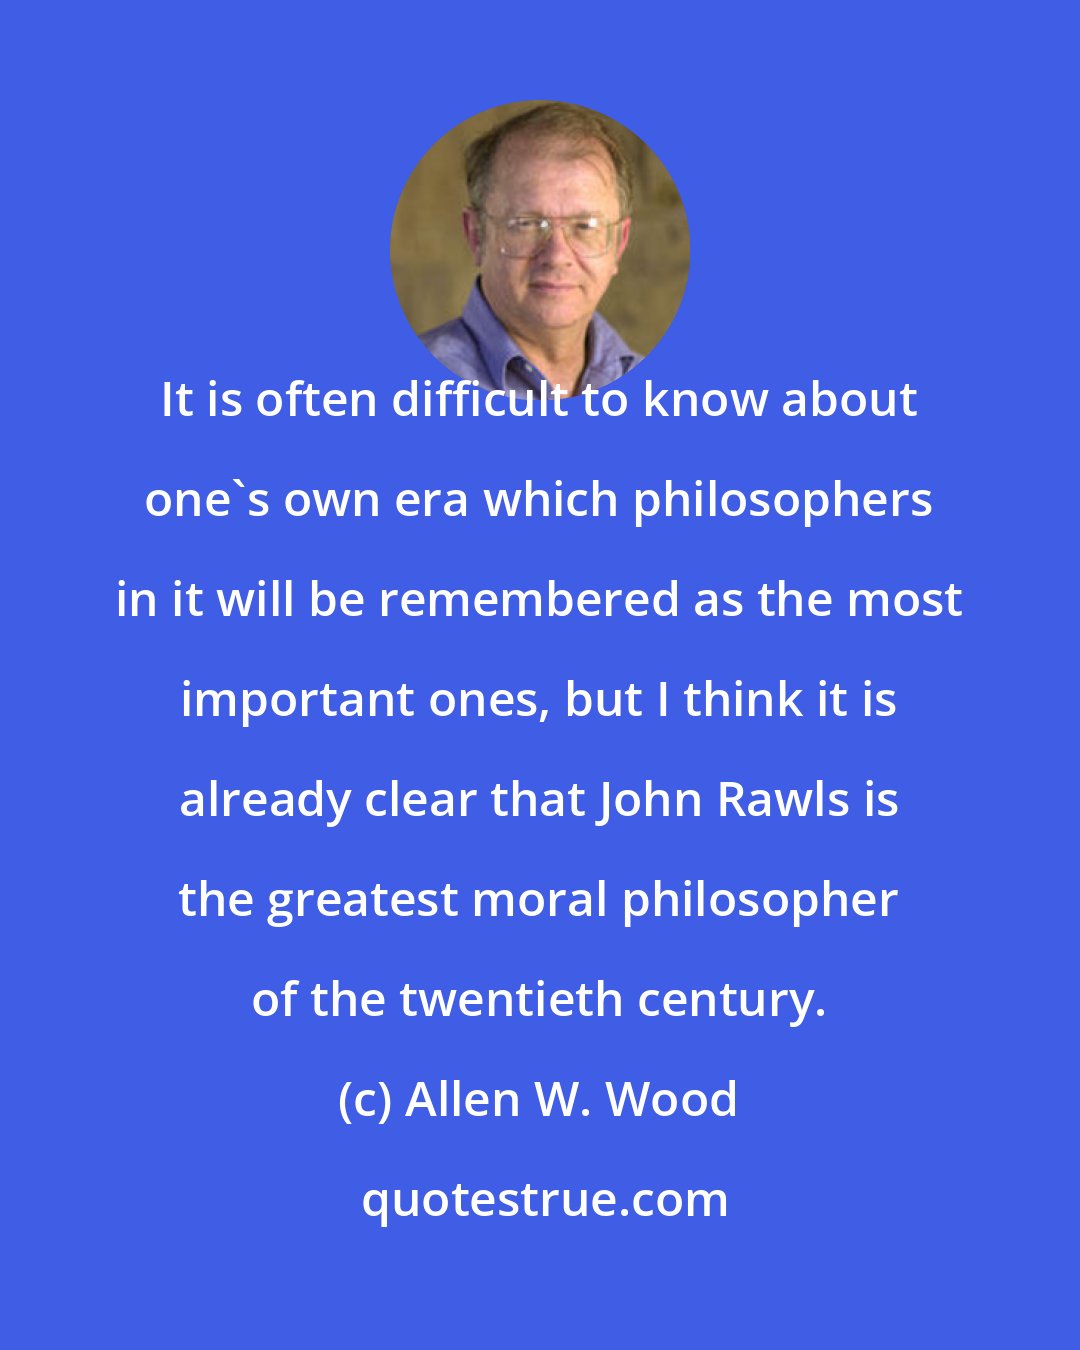 Allen W. Wood: It is often difficult to know about one's own era which philosophers in it will be remembered as the most important ones, but I think it is already clear that John Rawls is the greatest moral philosopher of the twentieth century.